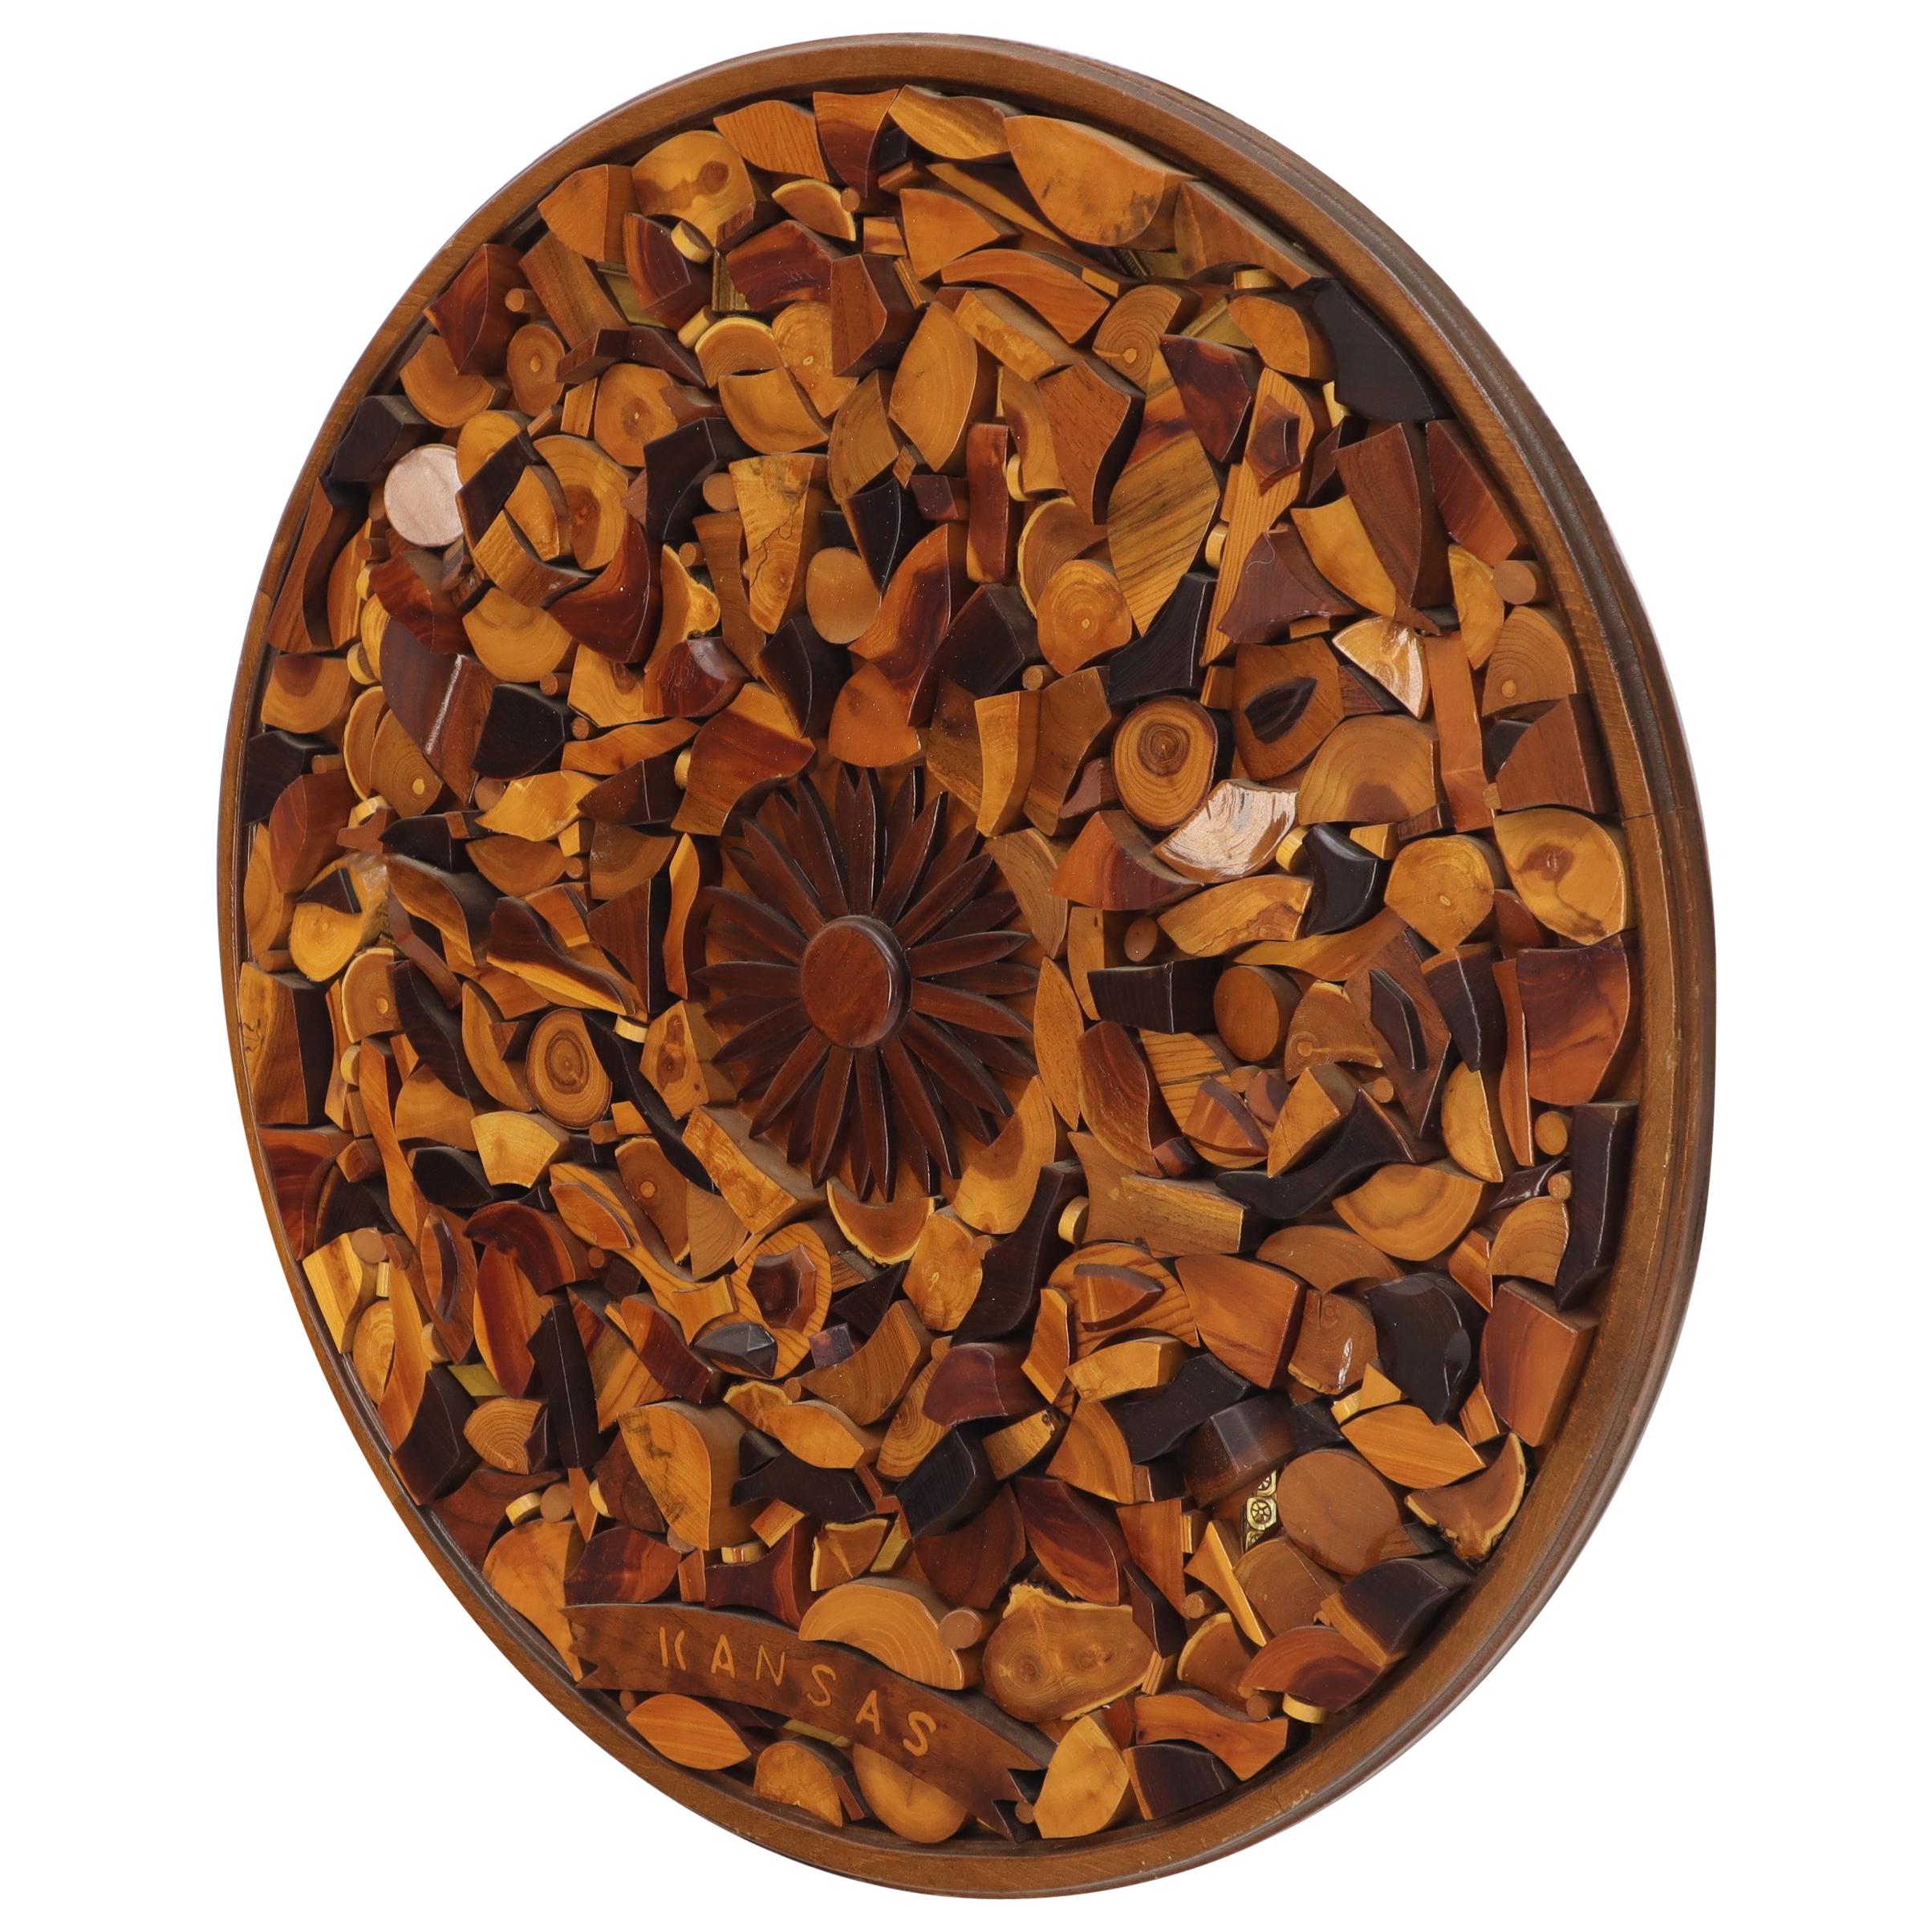 Large Mid-Century Modern round wall sculpture wood pieces collage with sunburst rosette in the center.